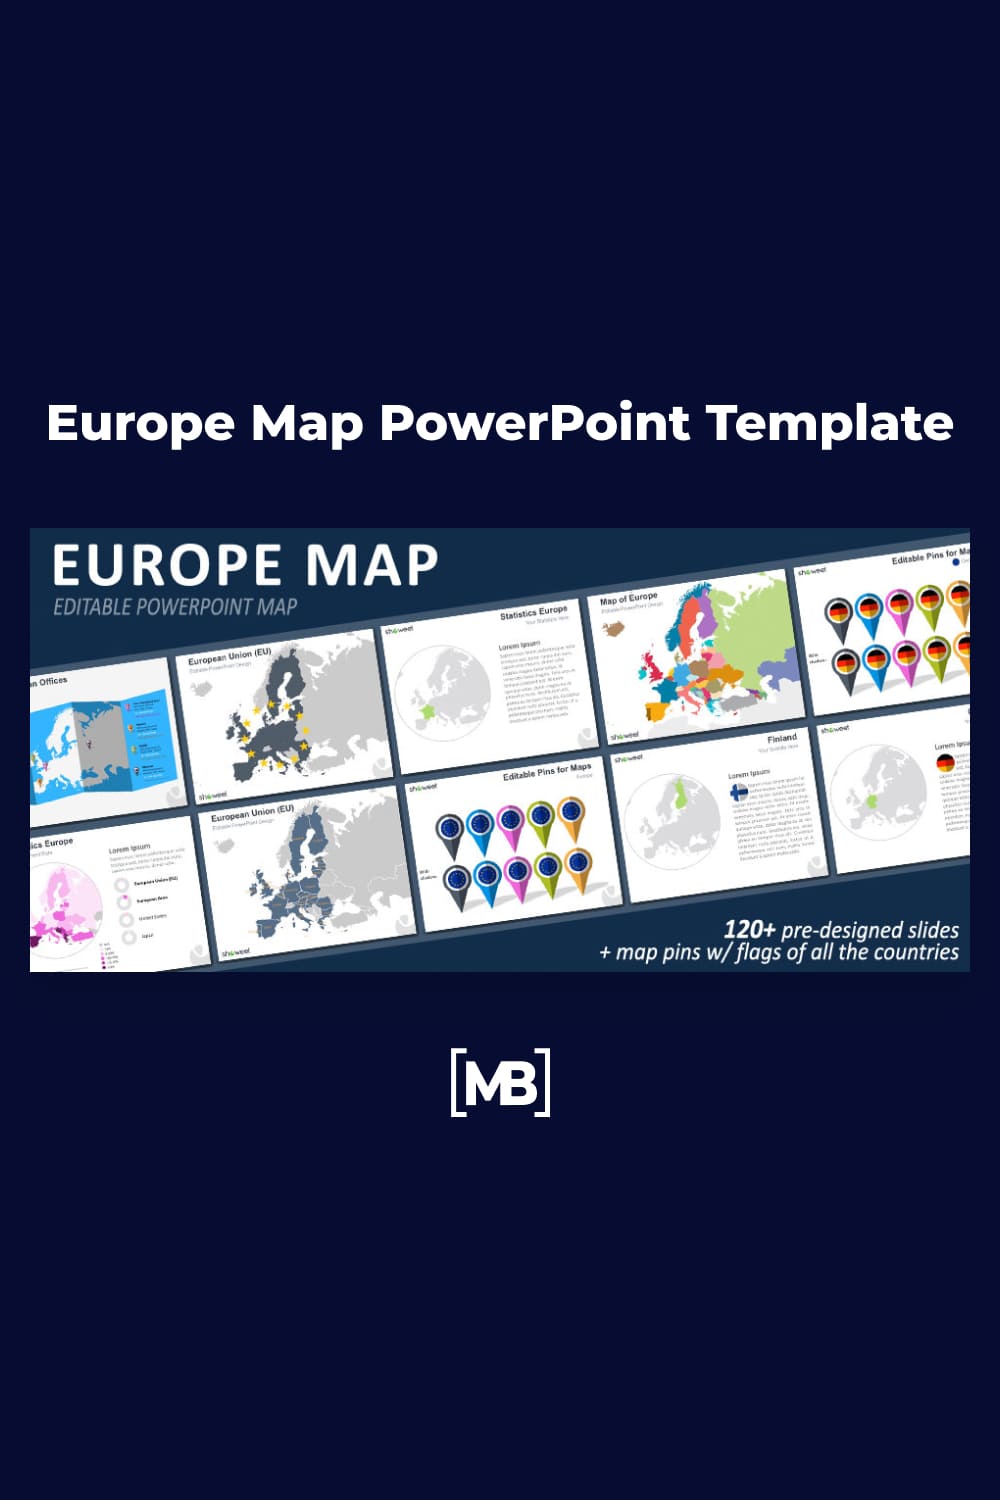 Europe map powerpoint template.